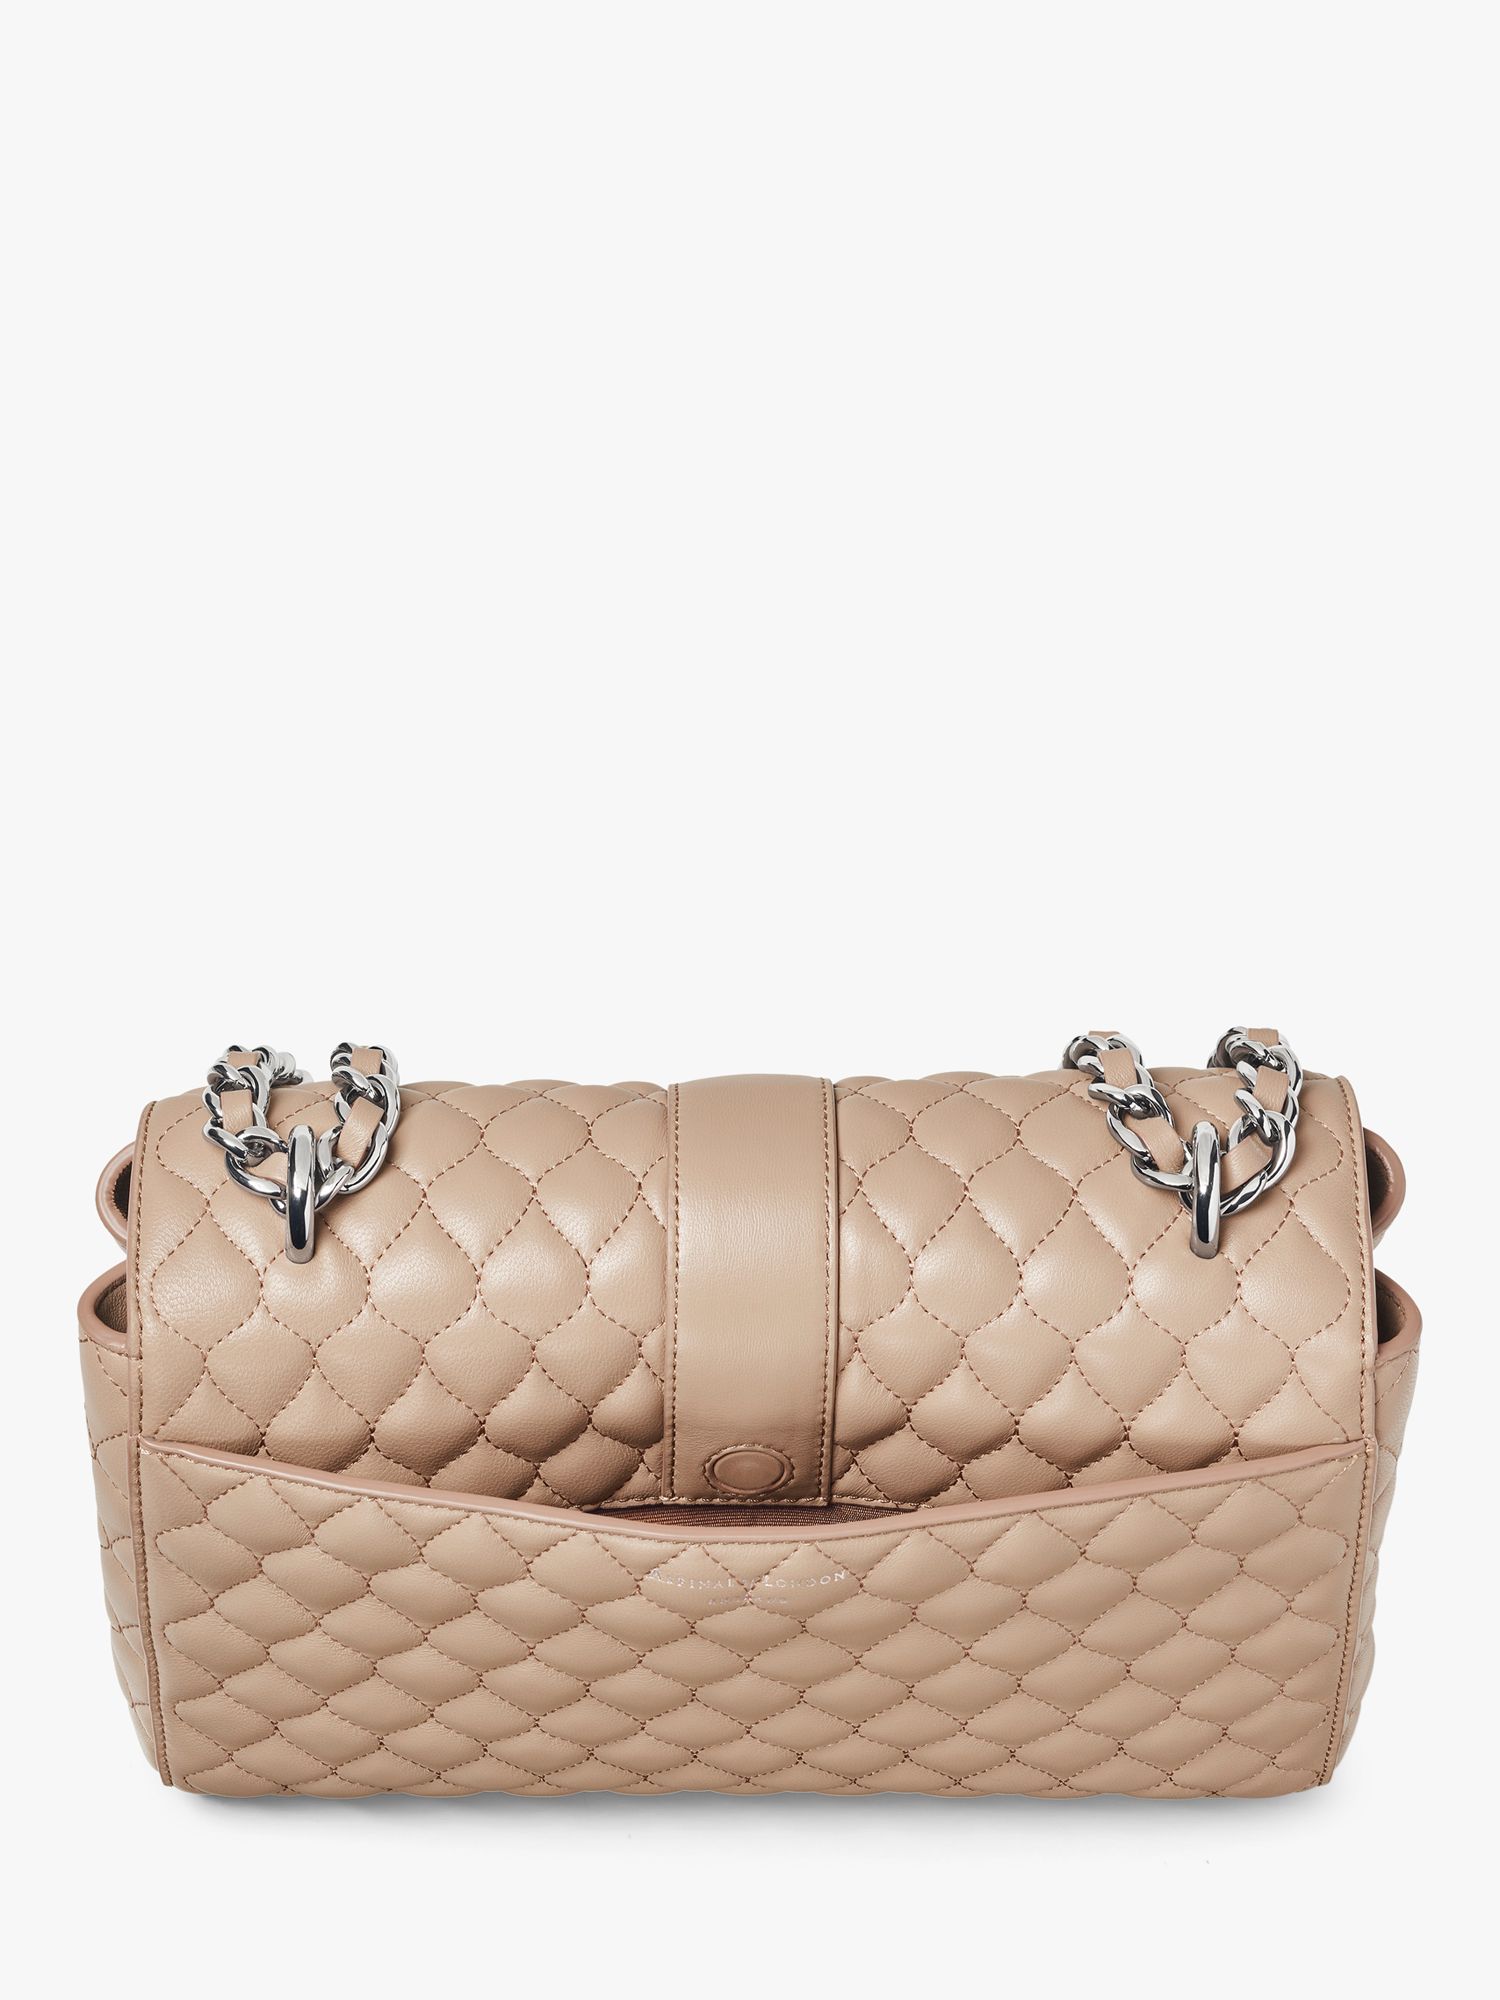 Aspinal of London Lottie Large Smooth Quilted Leather Shoulder Bag, Taupe